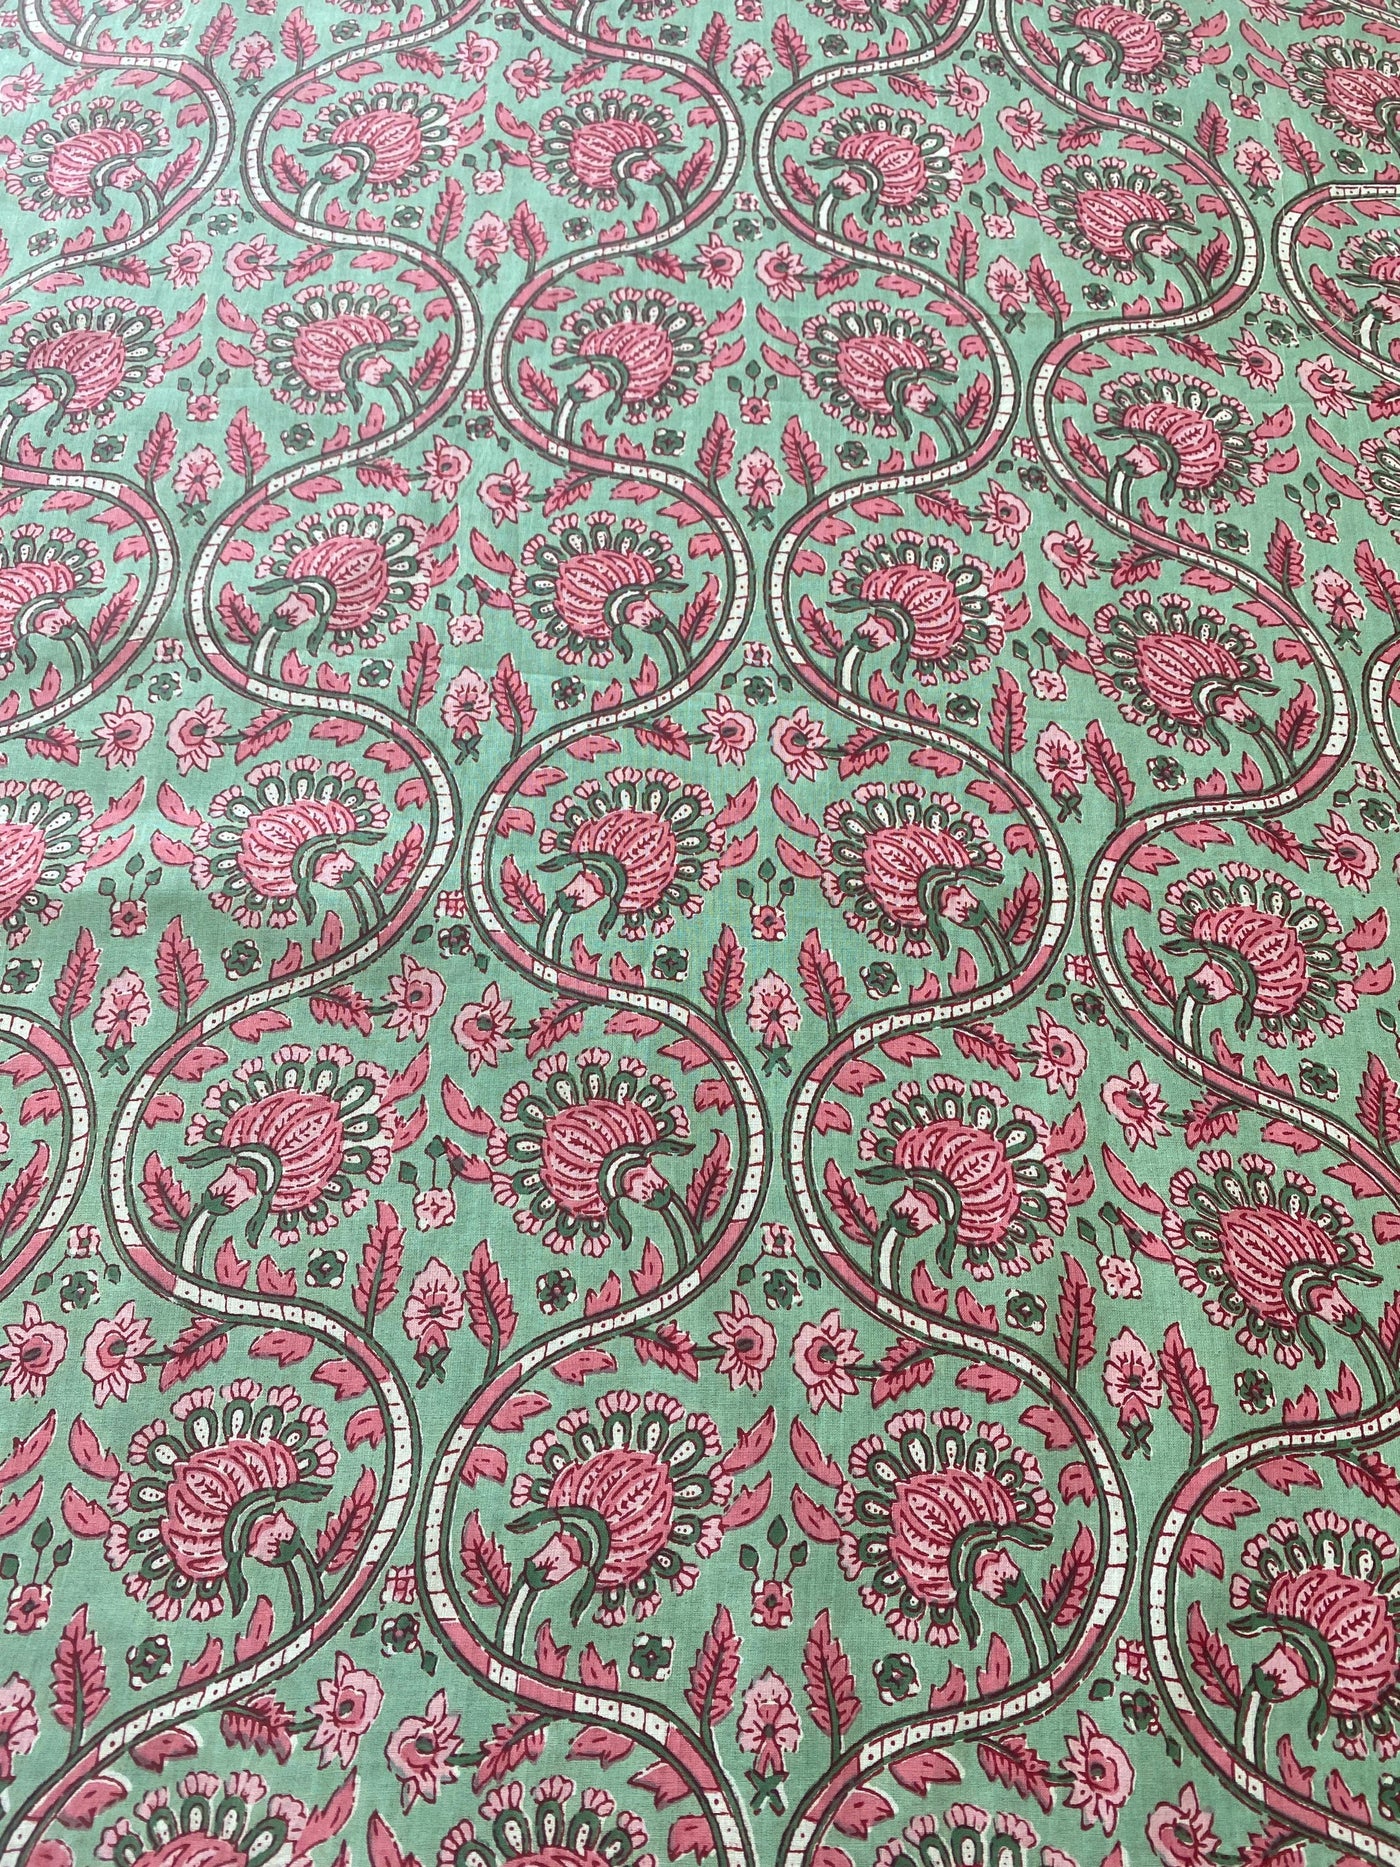 Tea Green, Middle Green, Salmon Pink Floral Indian Hand Printed Cotton Cloth, Fabric by the yard, Women's Clothing Curtains Pillow Cover Bag